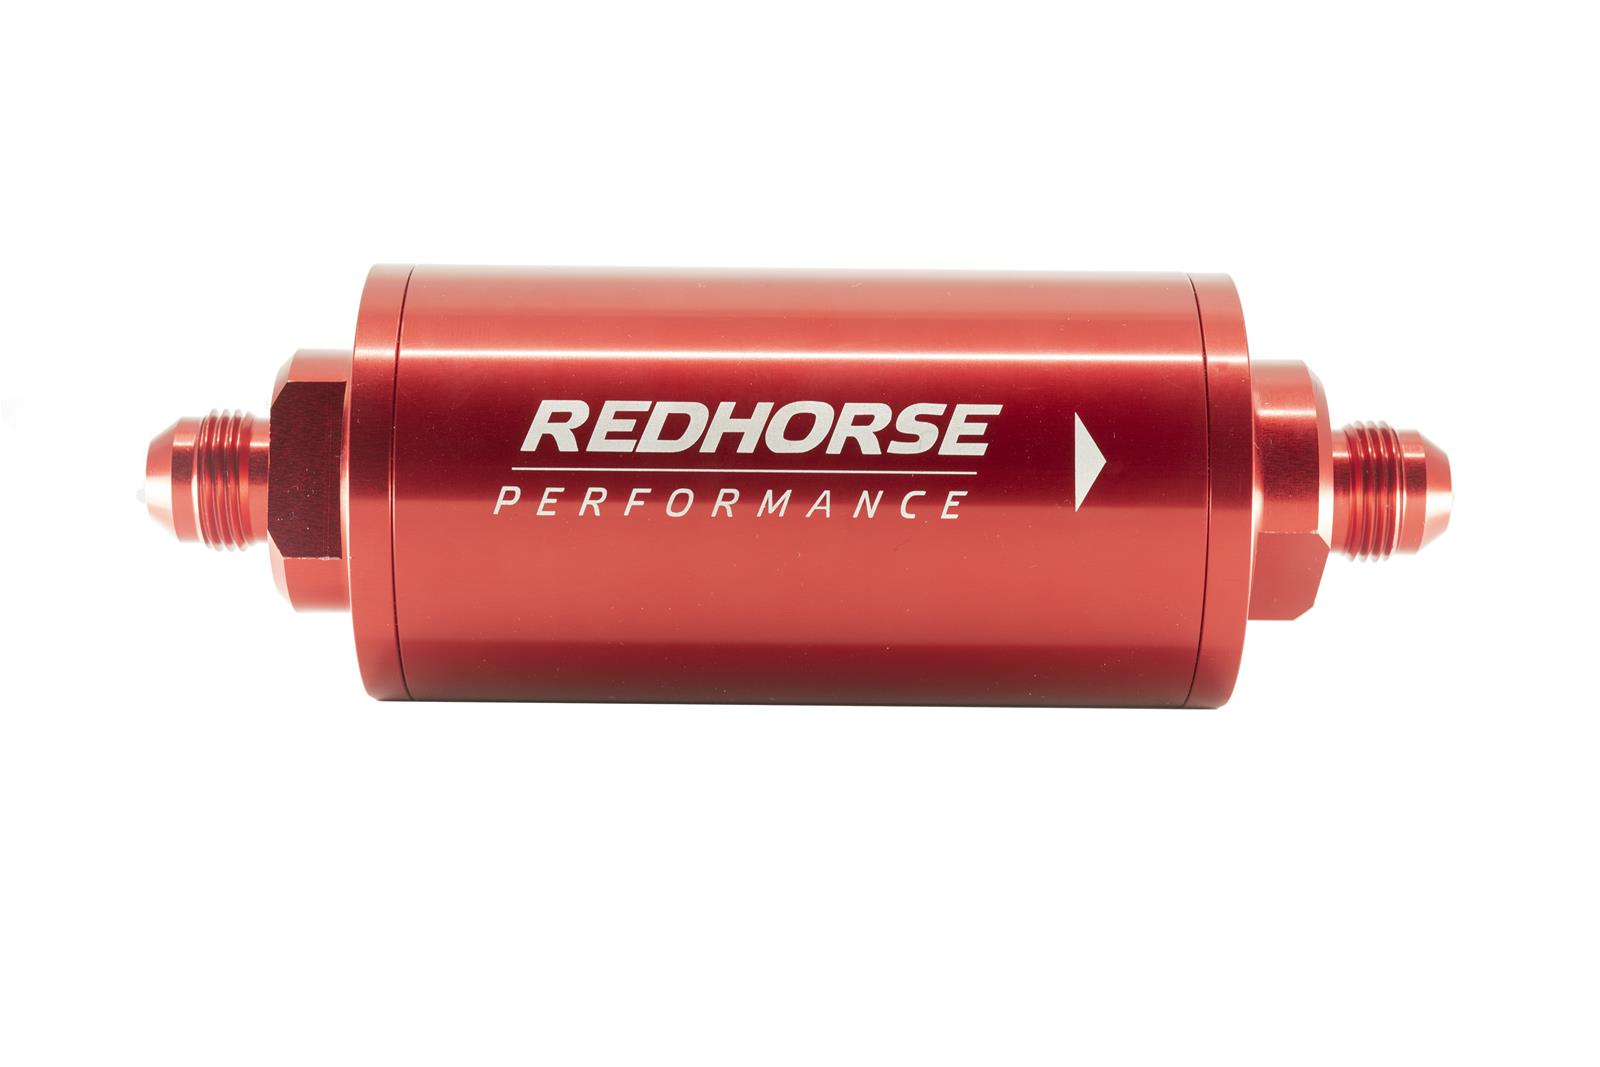 Redhorse Performance 4651-08-3-10 6in Cylindrical In-Line Race Fuel Filter w/ 10 Micron S.S. element - 08 AN